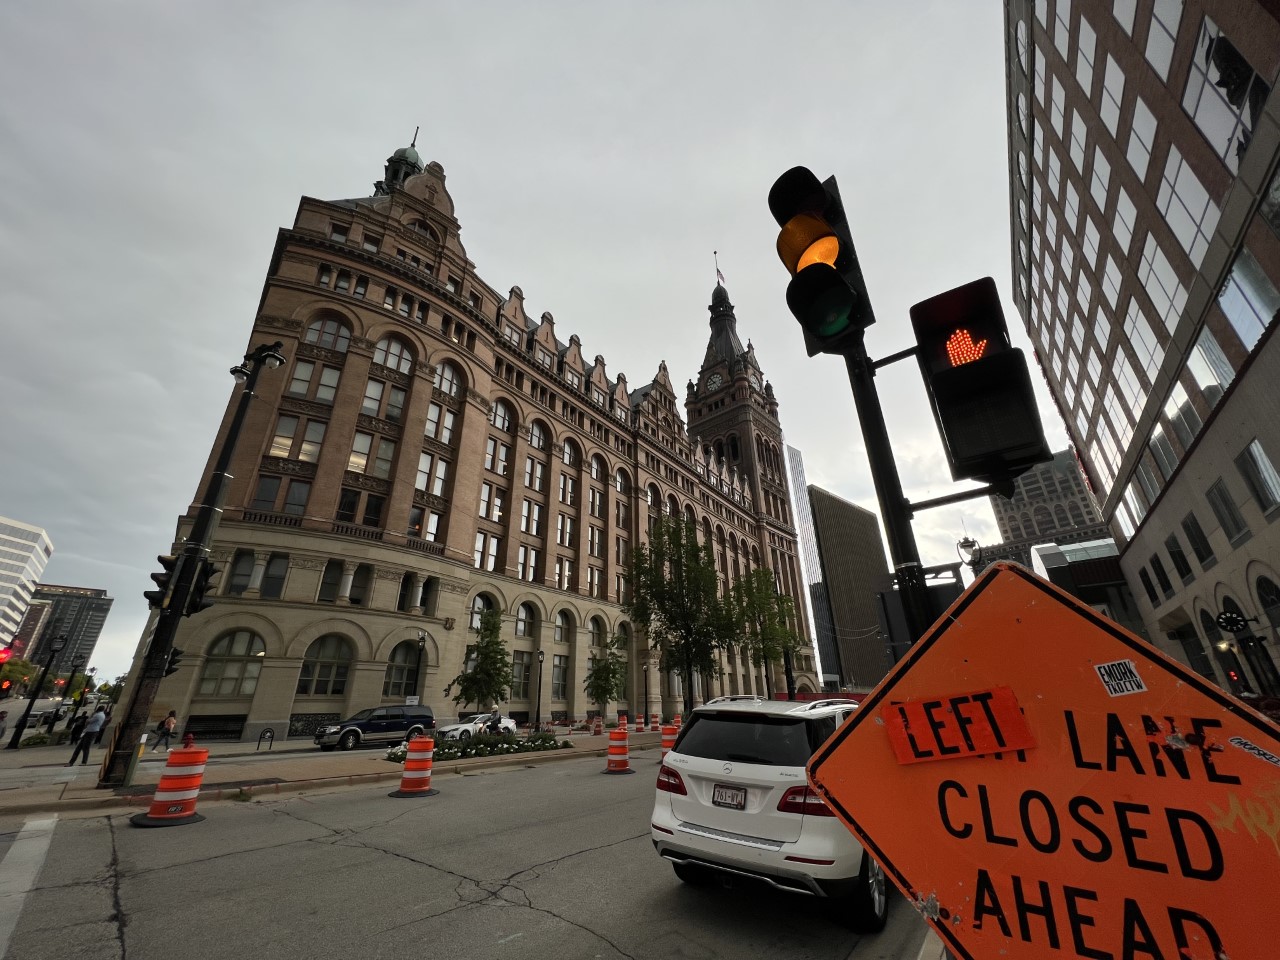 Milwaukee City Hall is seen off a street with a "left lane closed" sign